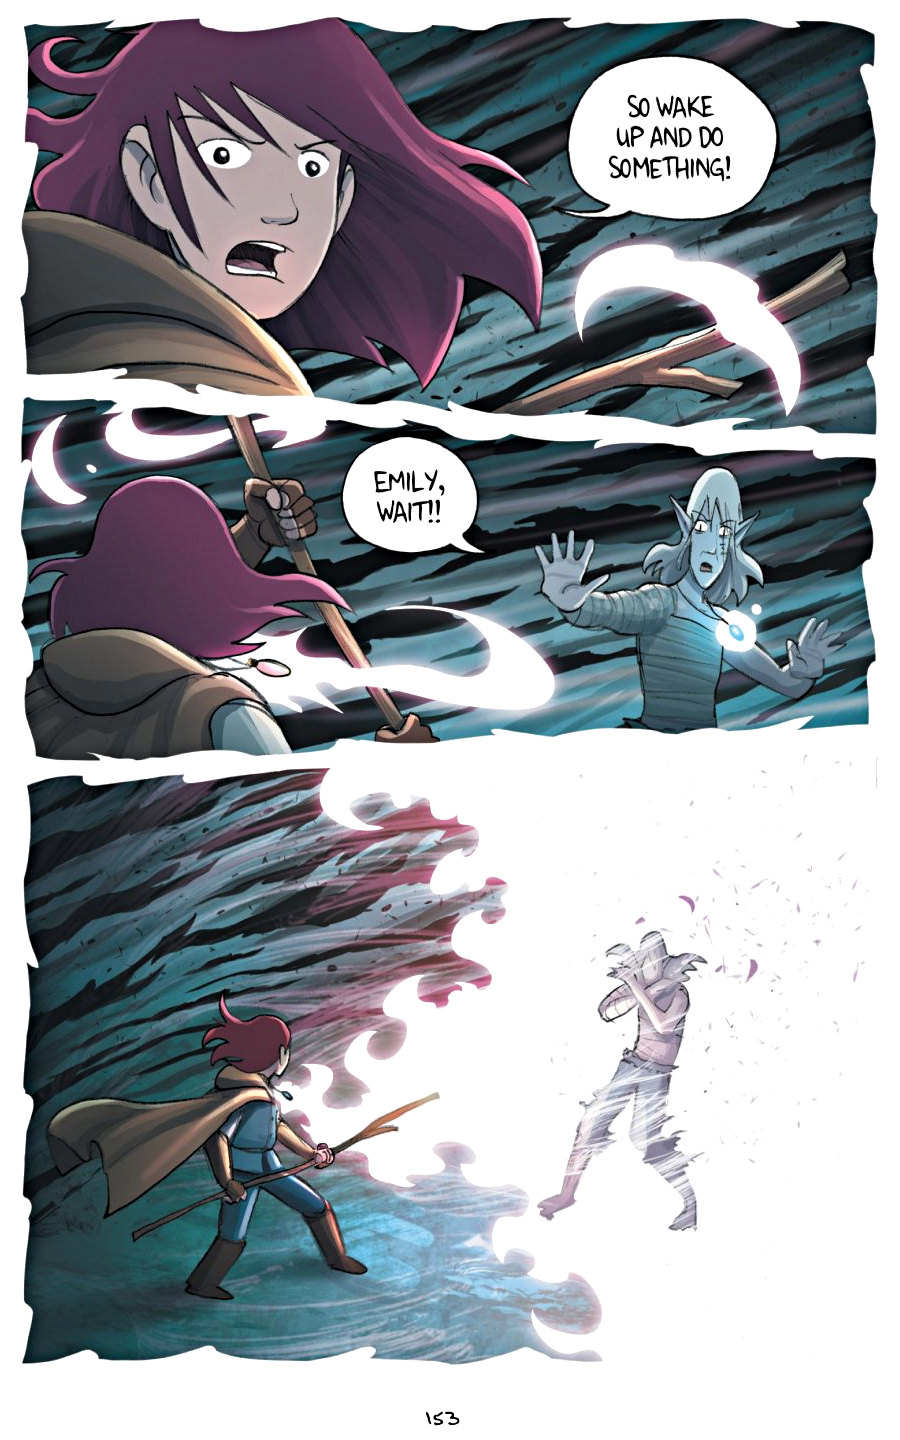 page 153 of amulet 5 prince of the elves graphic novel